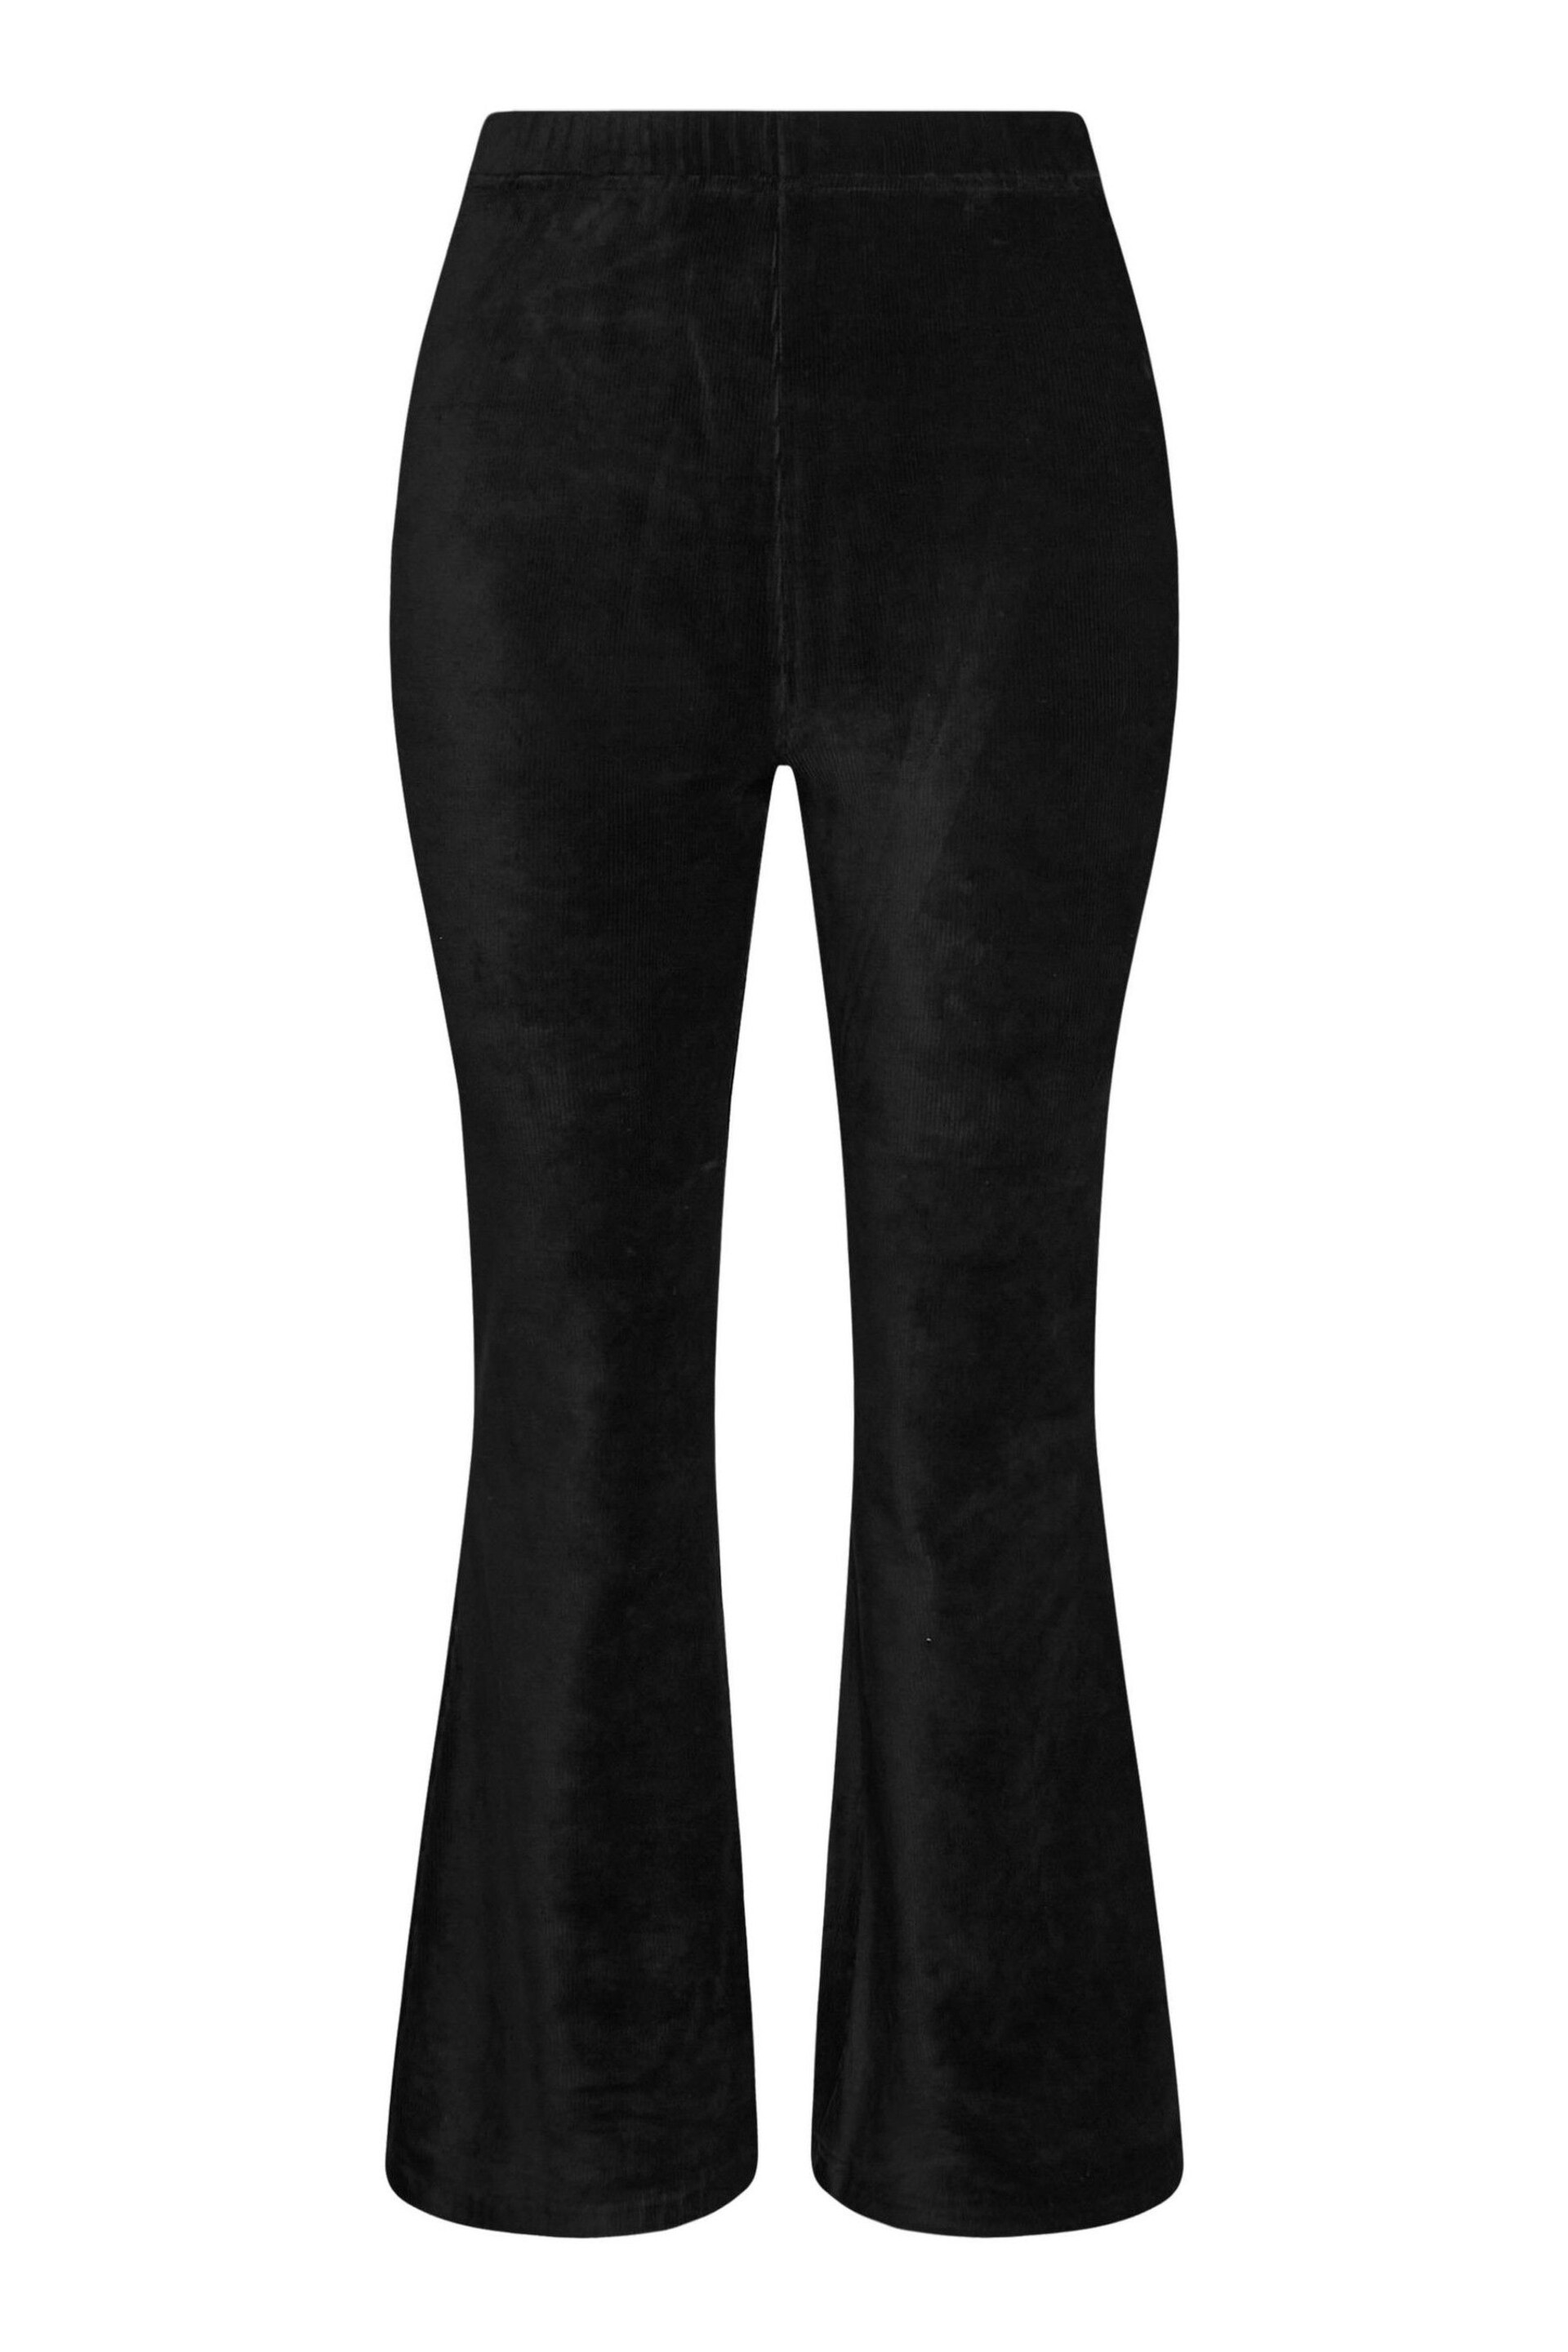 Yours Curve Black Cord Flare Trousers - Image 3 of 3